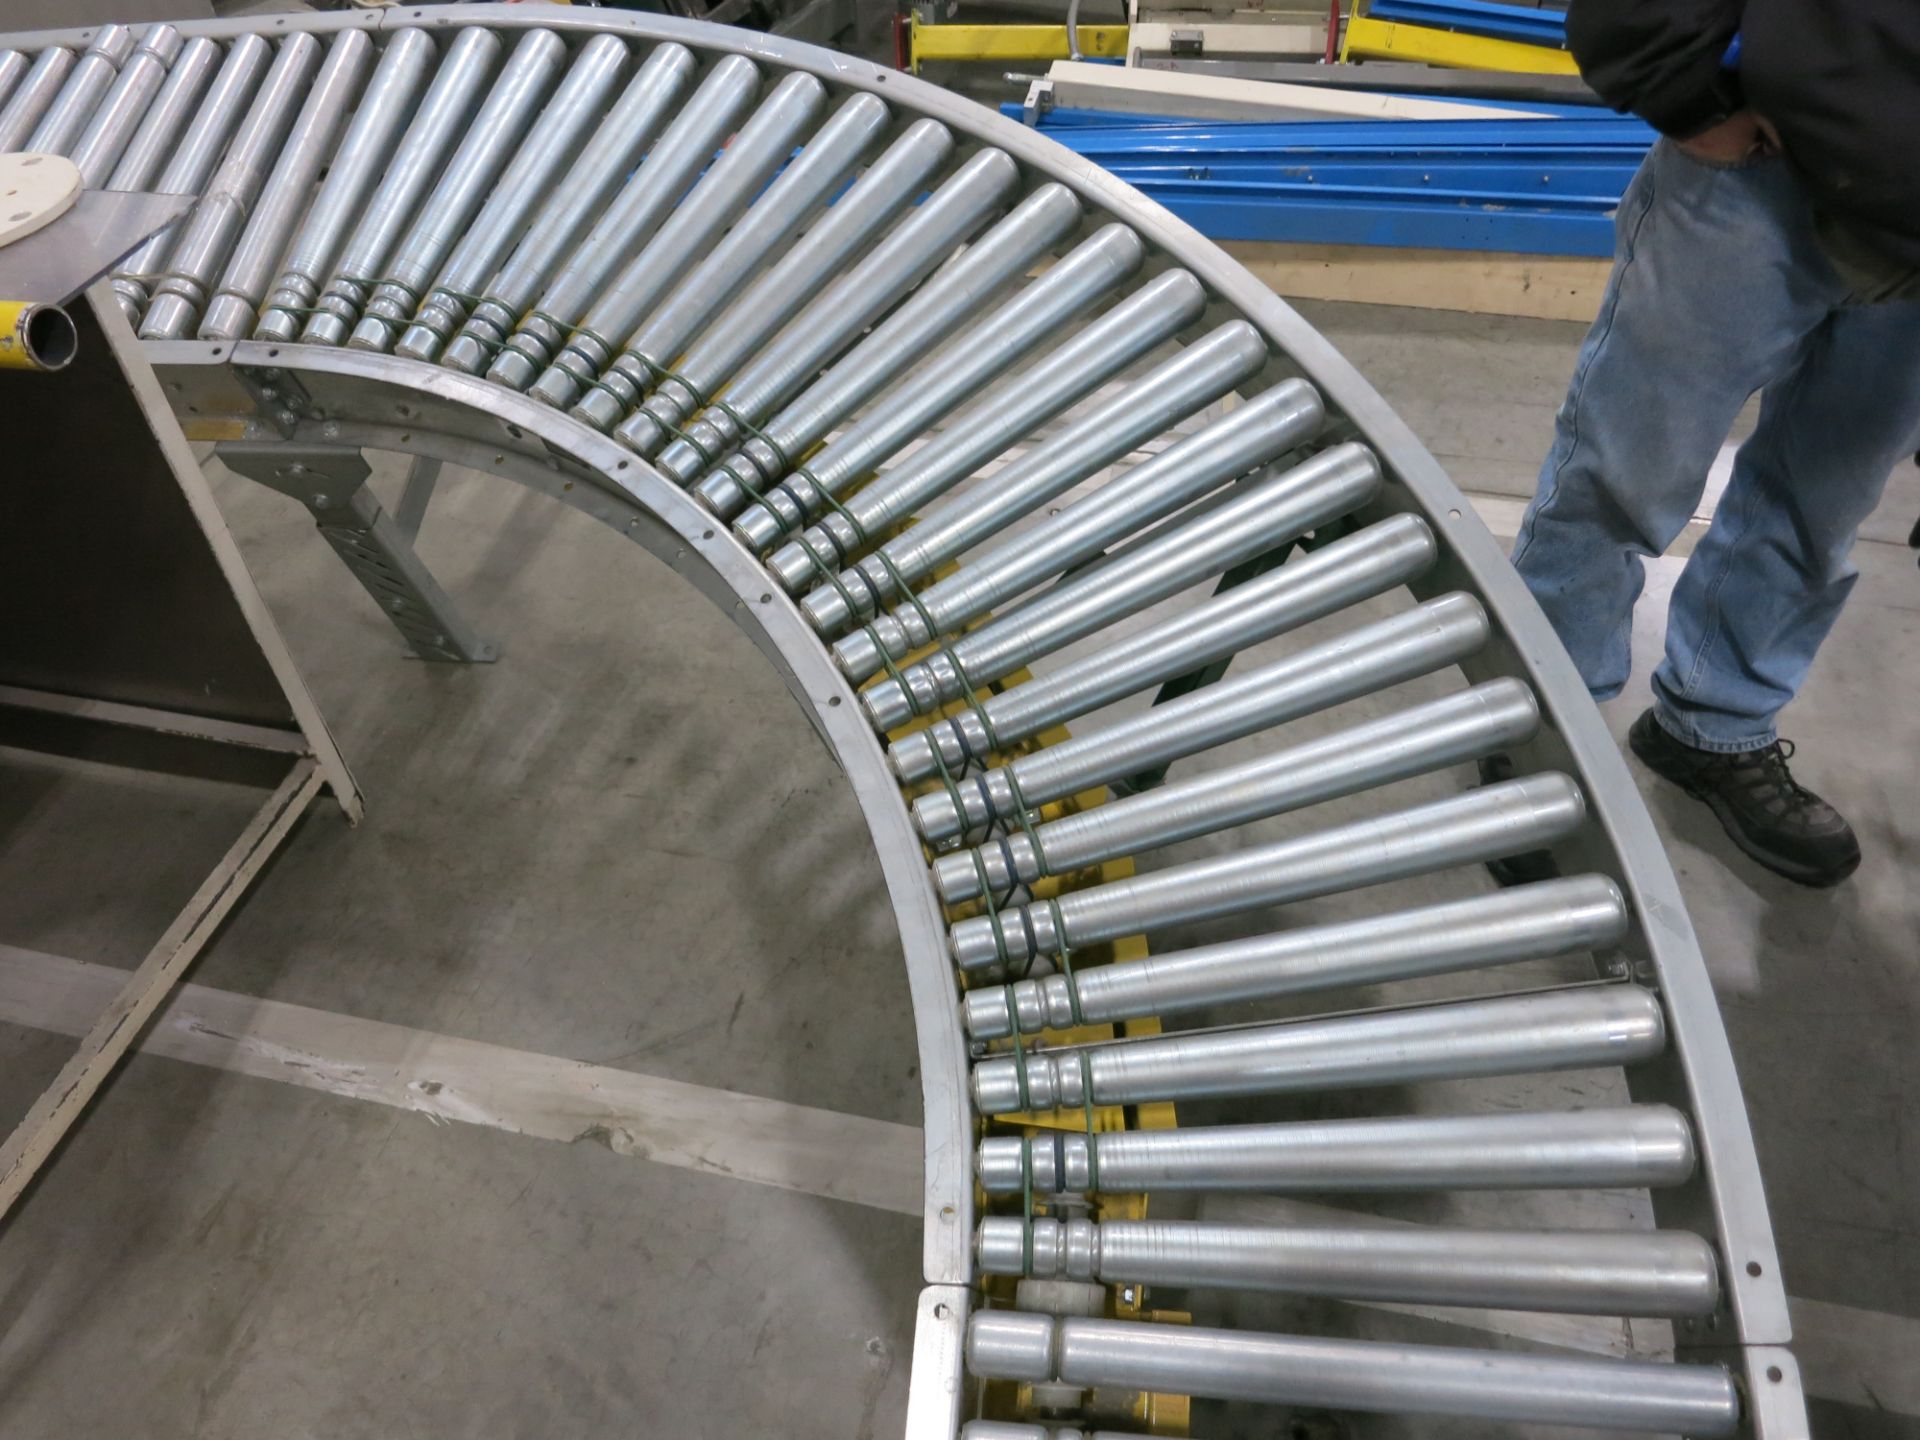 Single section of roller (case) conveyor